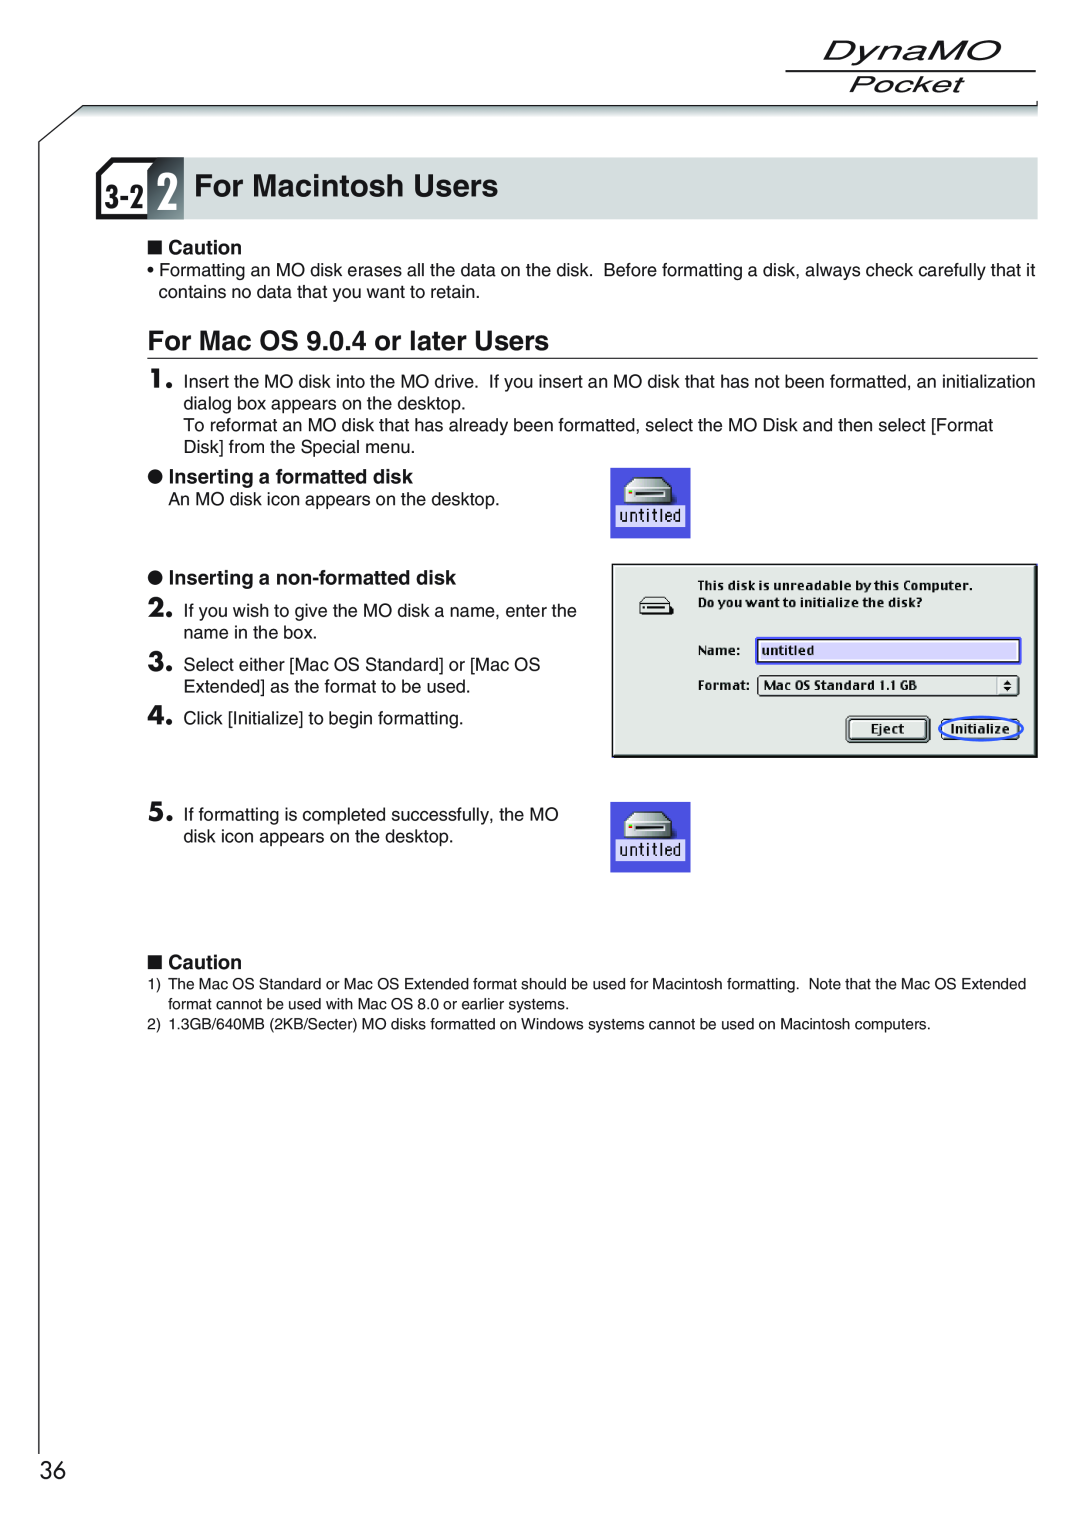 Fujitsu 1300U2 user manual 3-2 2 For Macintosh Users, For Mac OS 9.0.4 or later Users, Inserting a formatted disk 